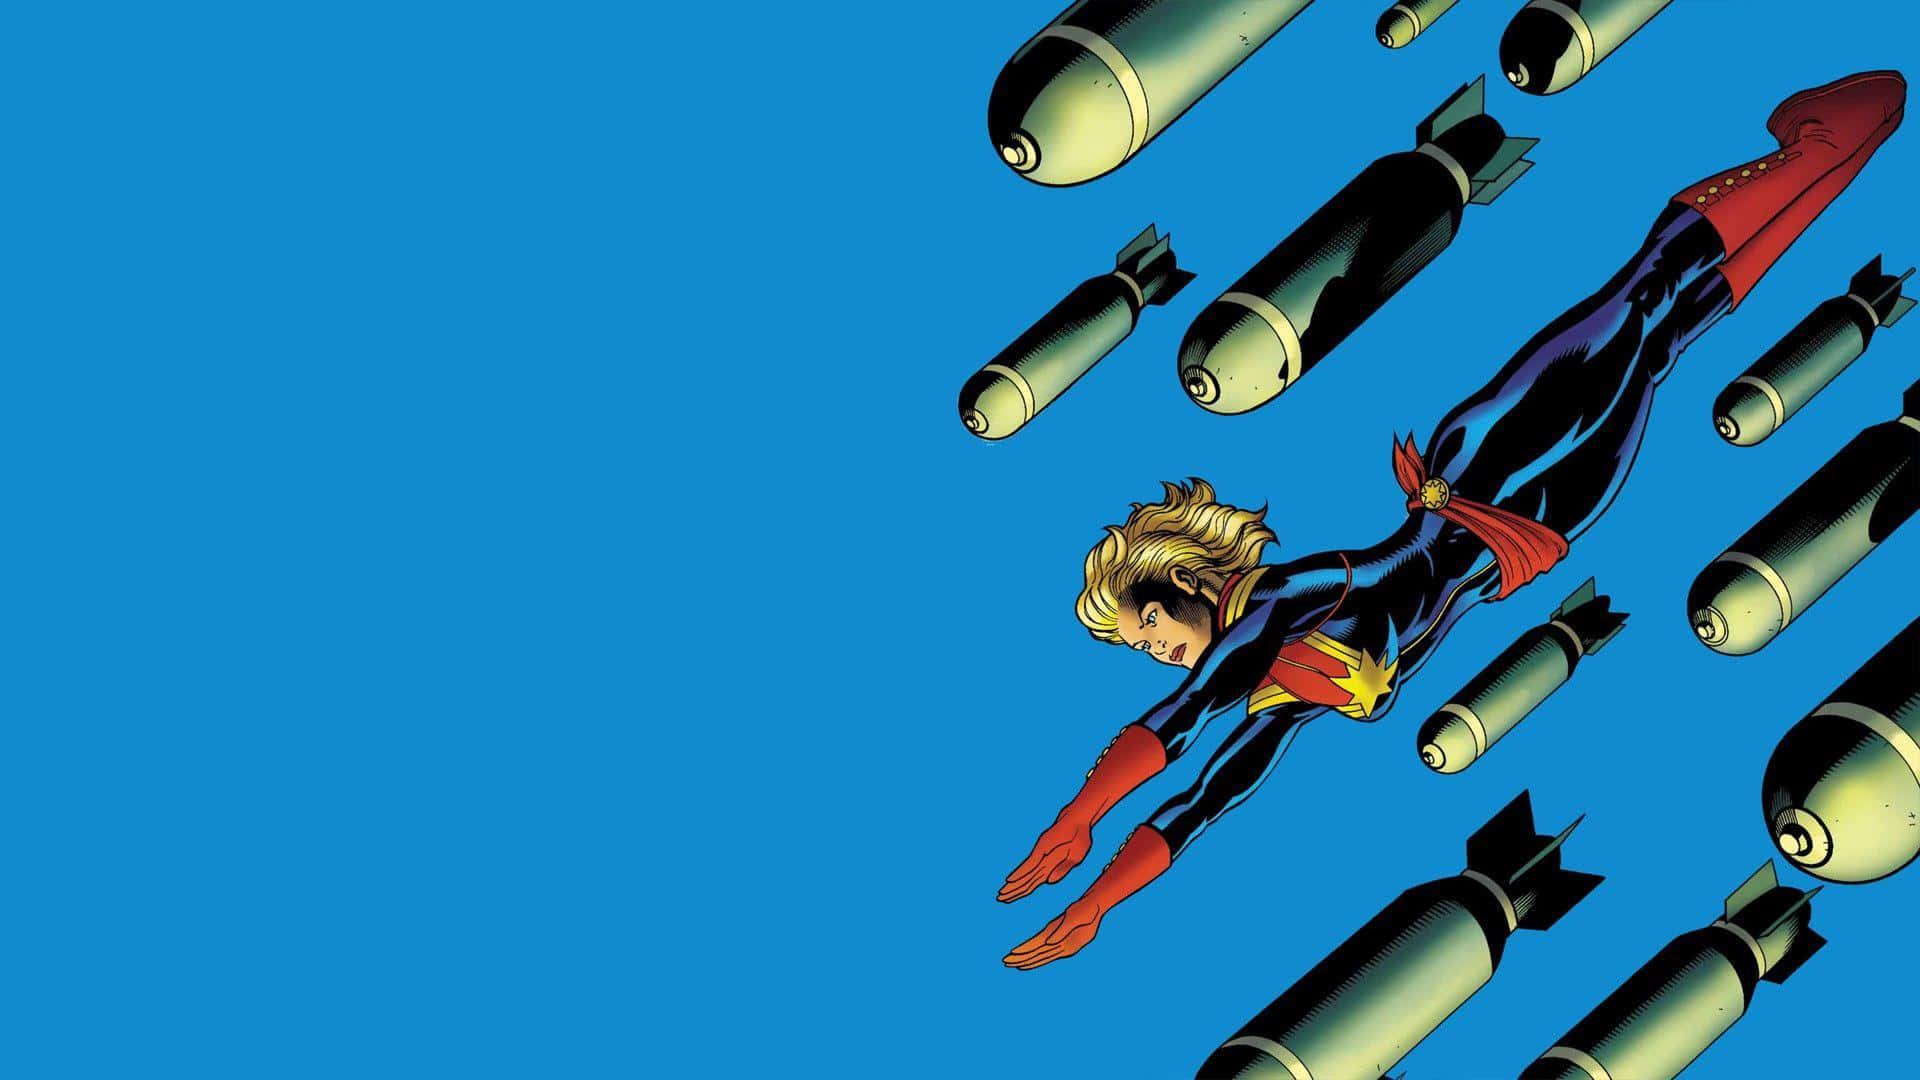 Captain Marvel Takes Flight In Her Powerful Suit In This Hd Wallpaper Background